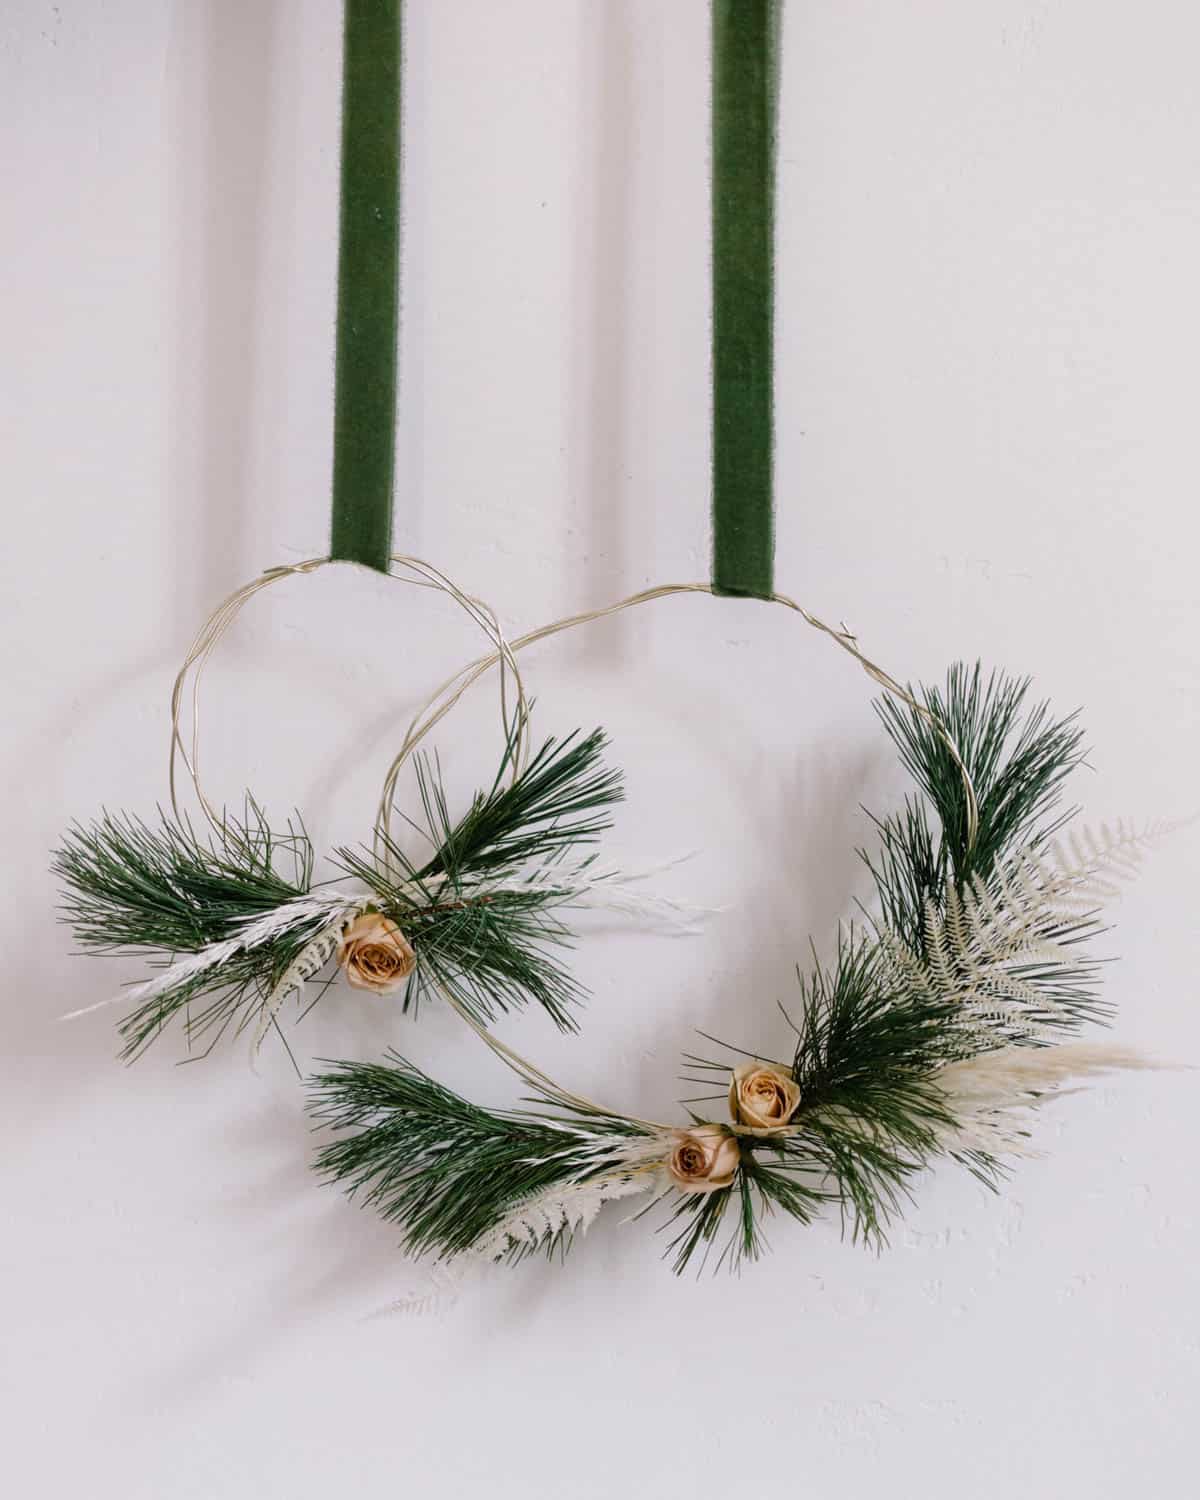 To modern holiday wreaths hanging on a wall by green ribbon.